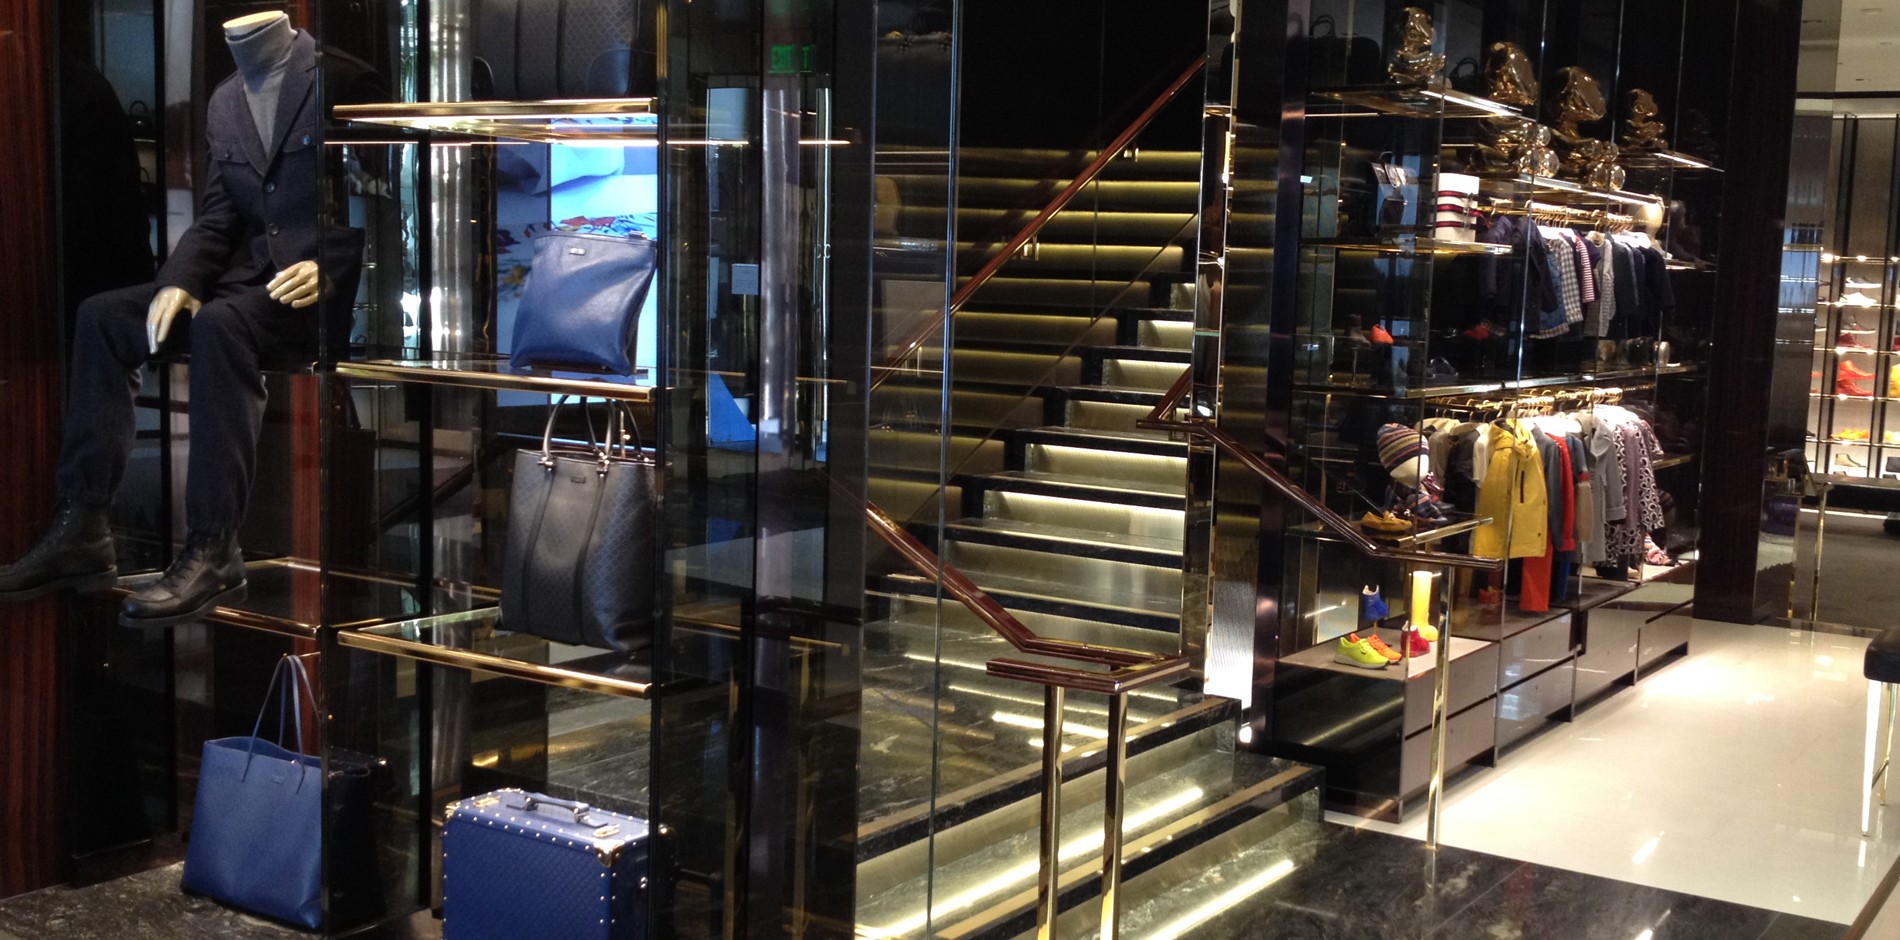 Gucci Flagship - Luxury Retail - Beverly Hills, CA Fit-out, Renovation